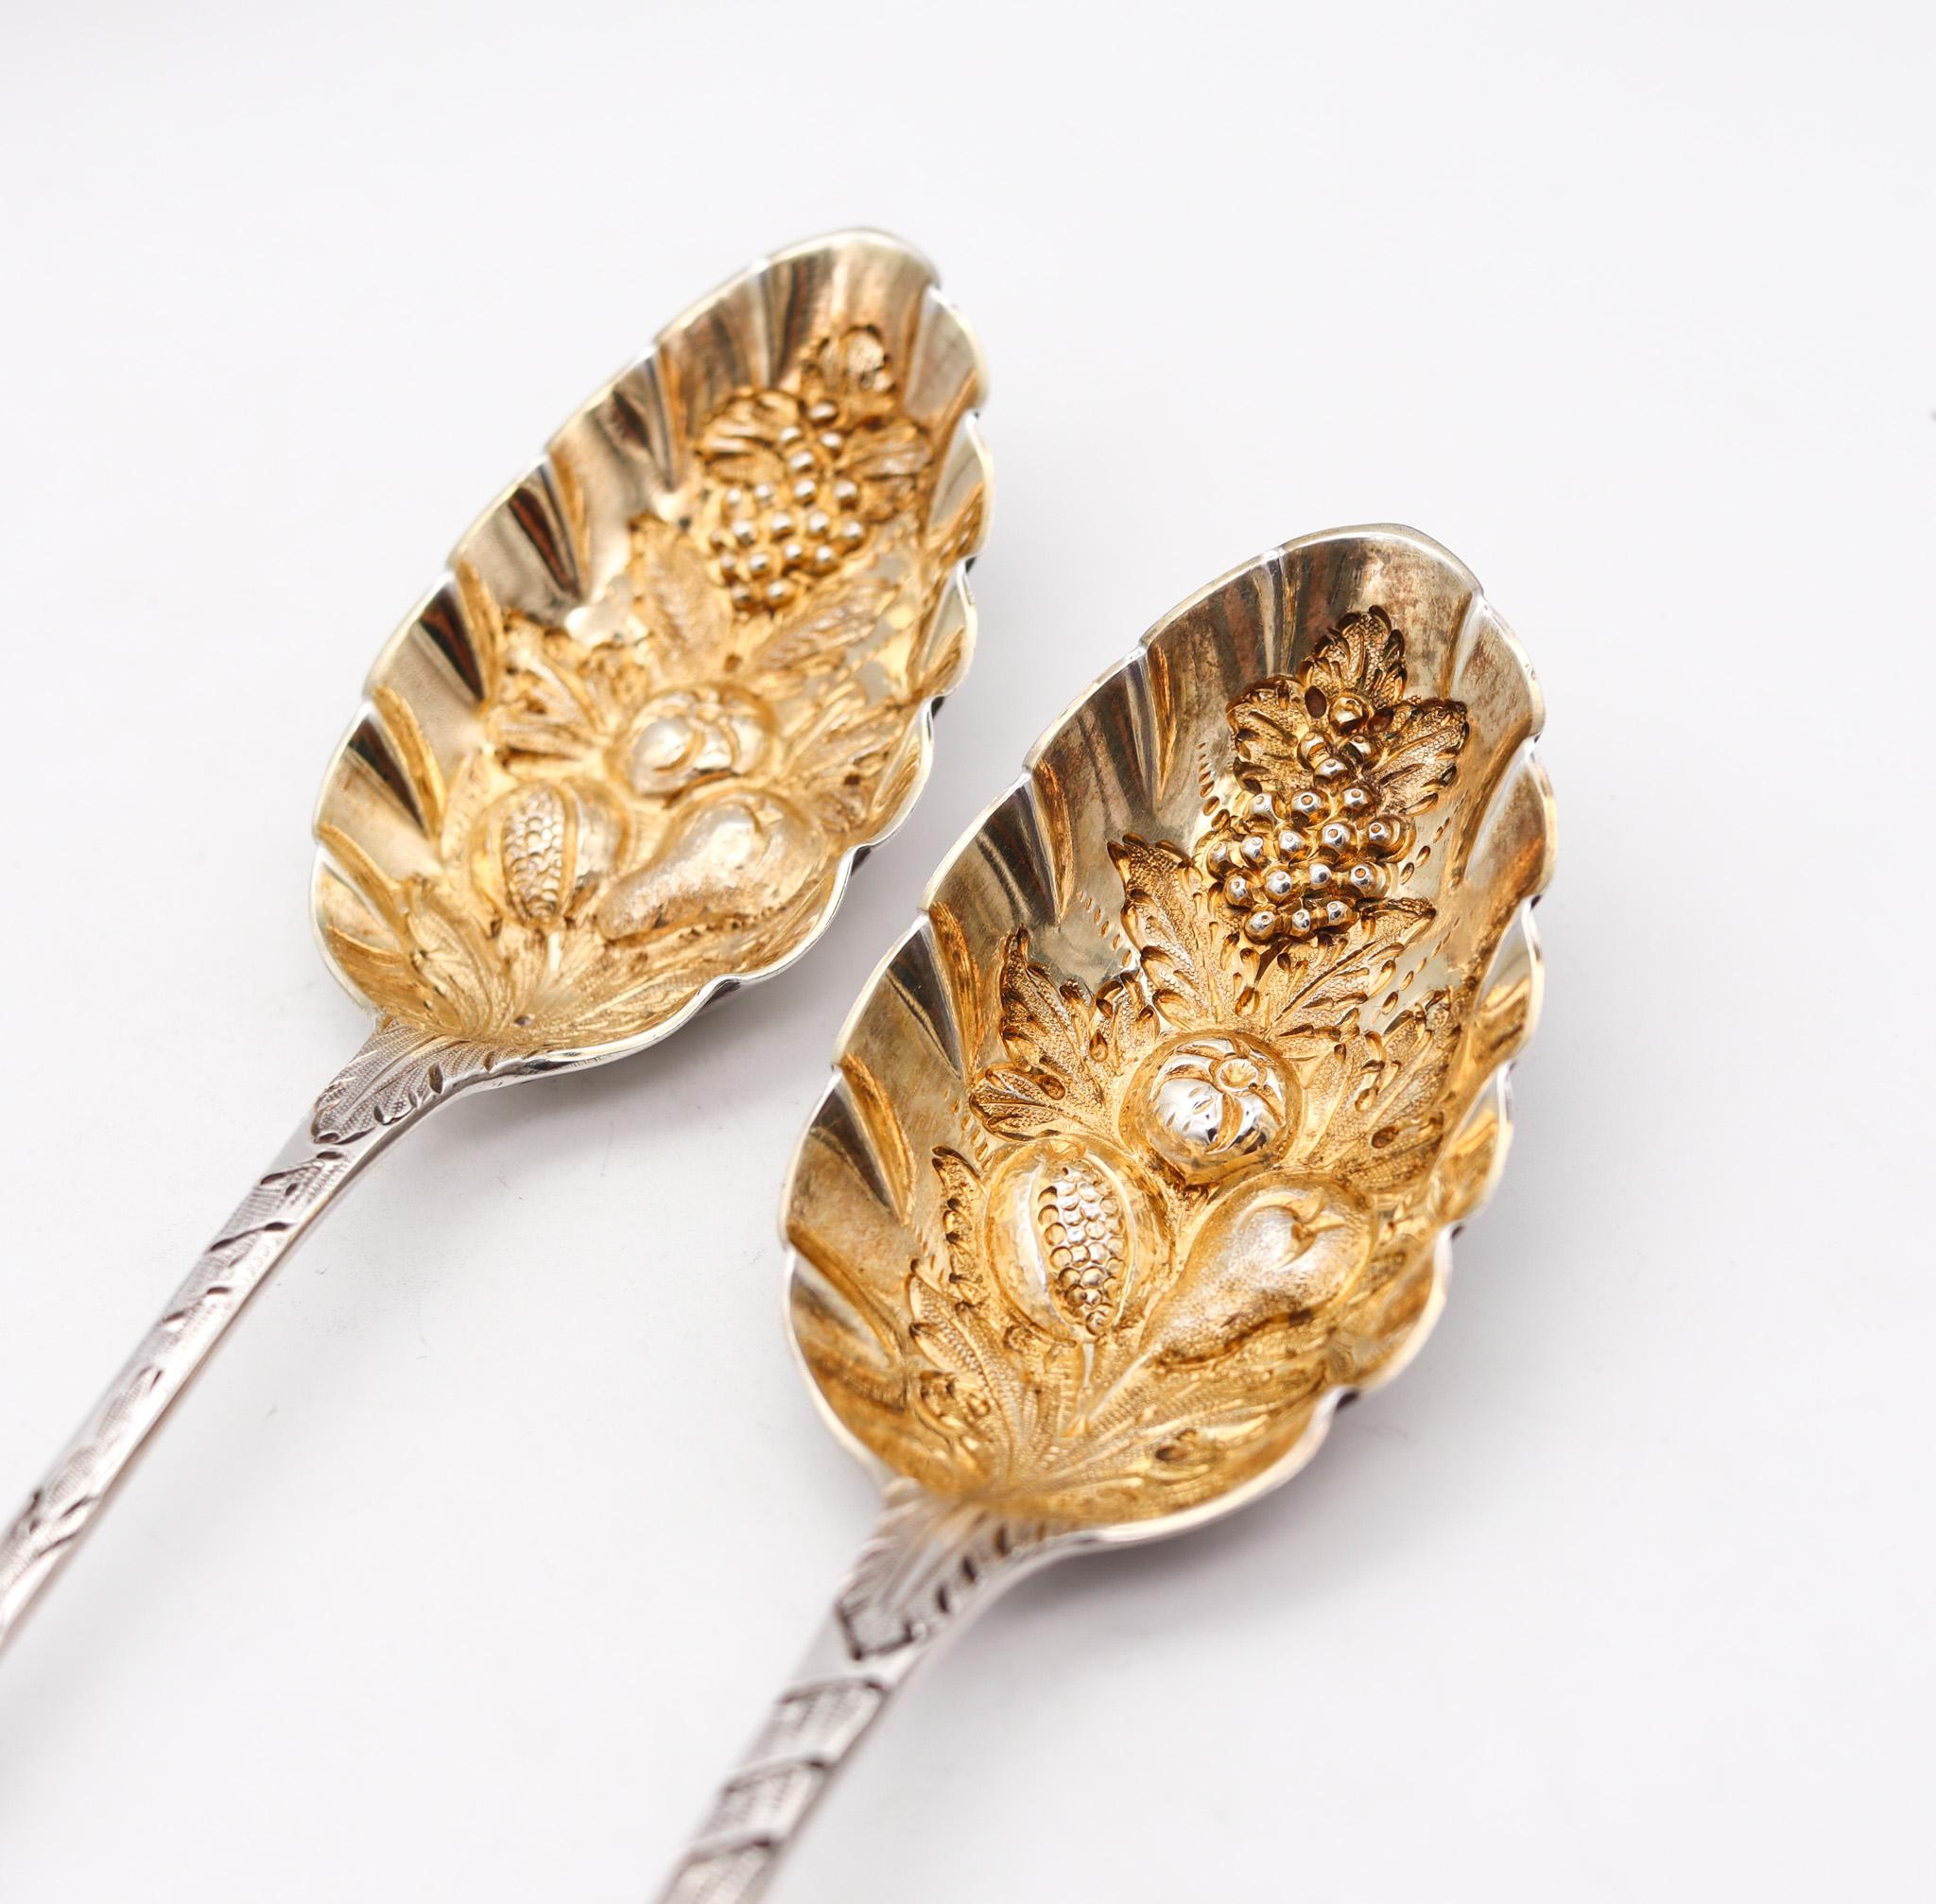 English Thomas Barker 1825 London Georgian Pair of Fruit Spoons in Gilded .925 Sterling For Sale